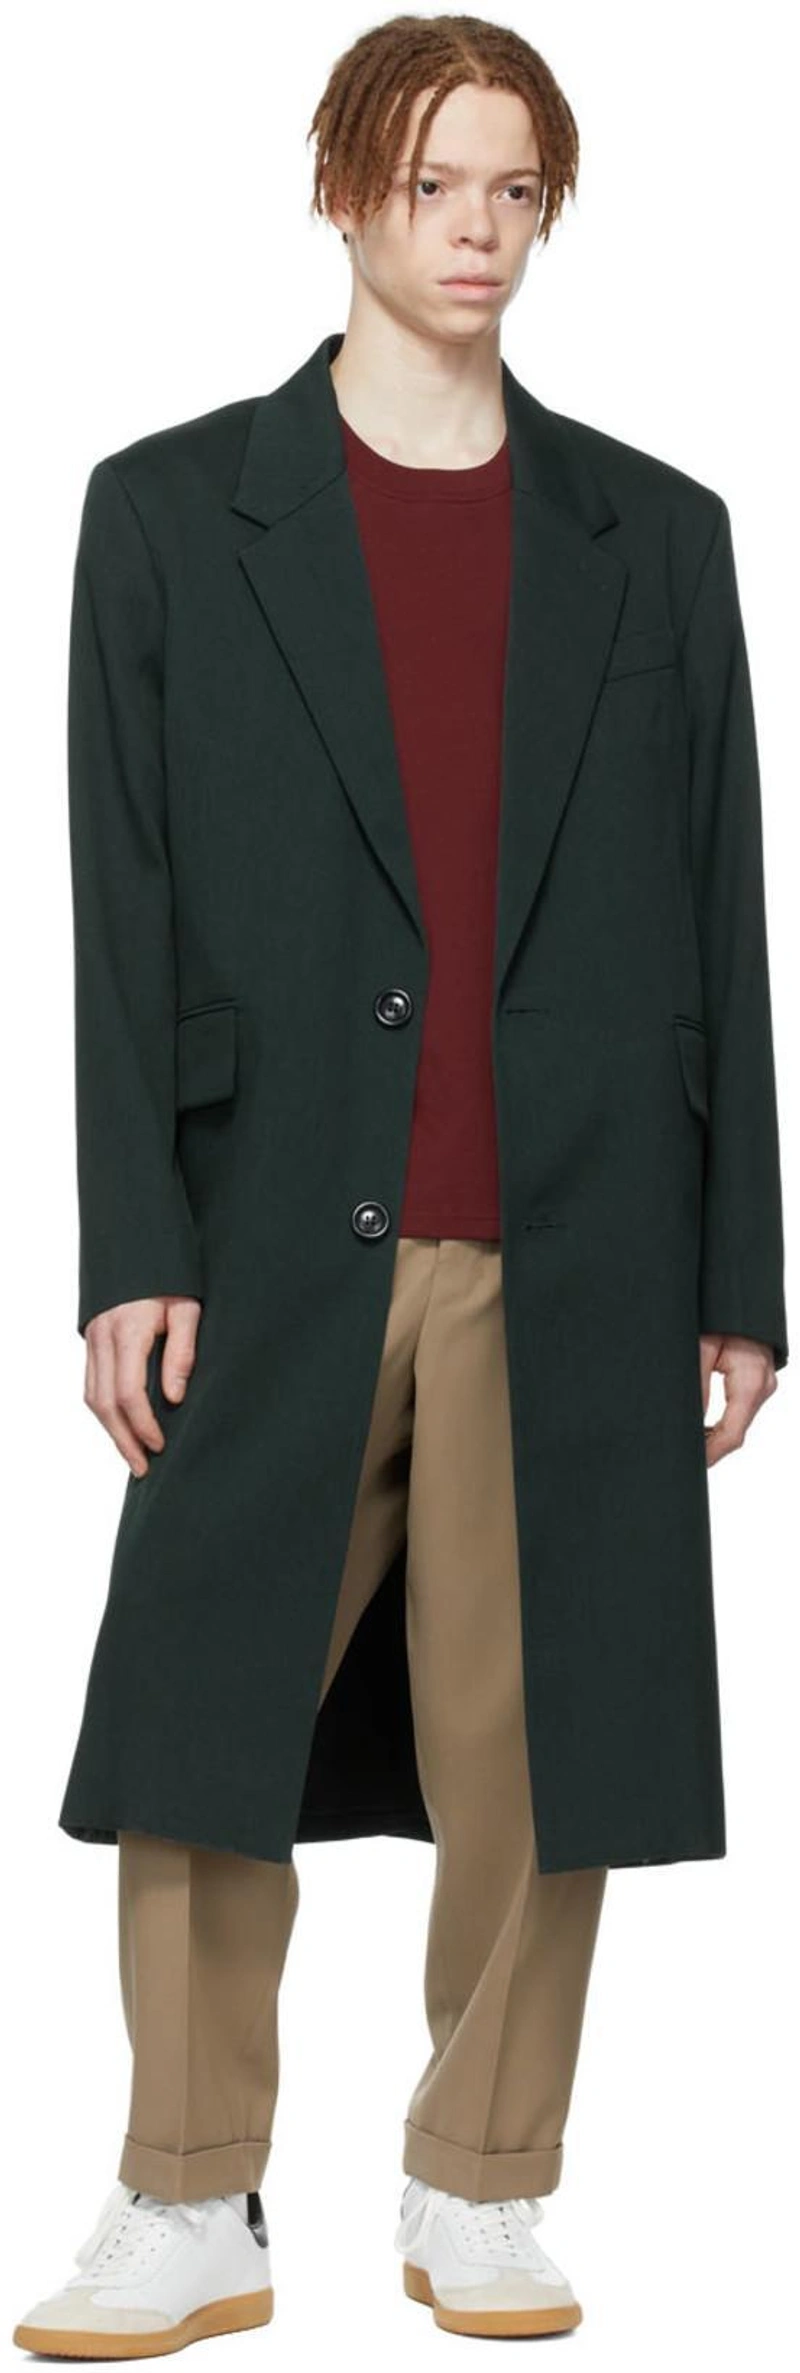 SSENSE's Post | Wearing: Ami Alexandre Mattiussi Green Wool Coat In Evergreen/311; Ami Alexandre Mattiussi Brown Polyester Trousers In Taupe/281; Isabel Marant Brycy Trainers In White Leather